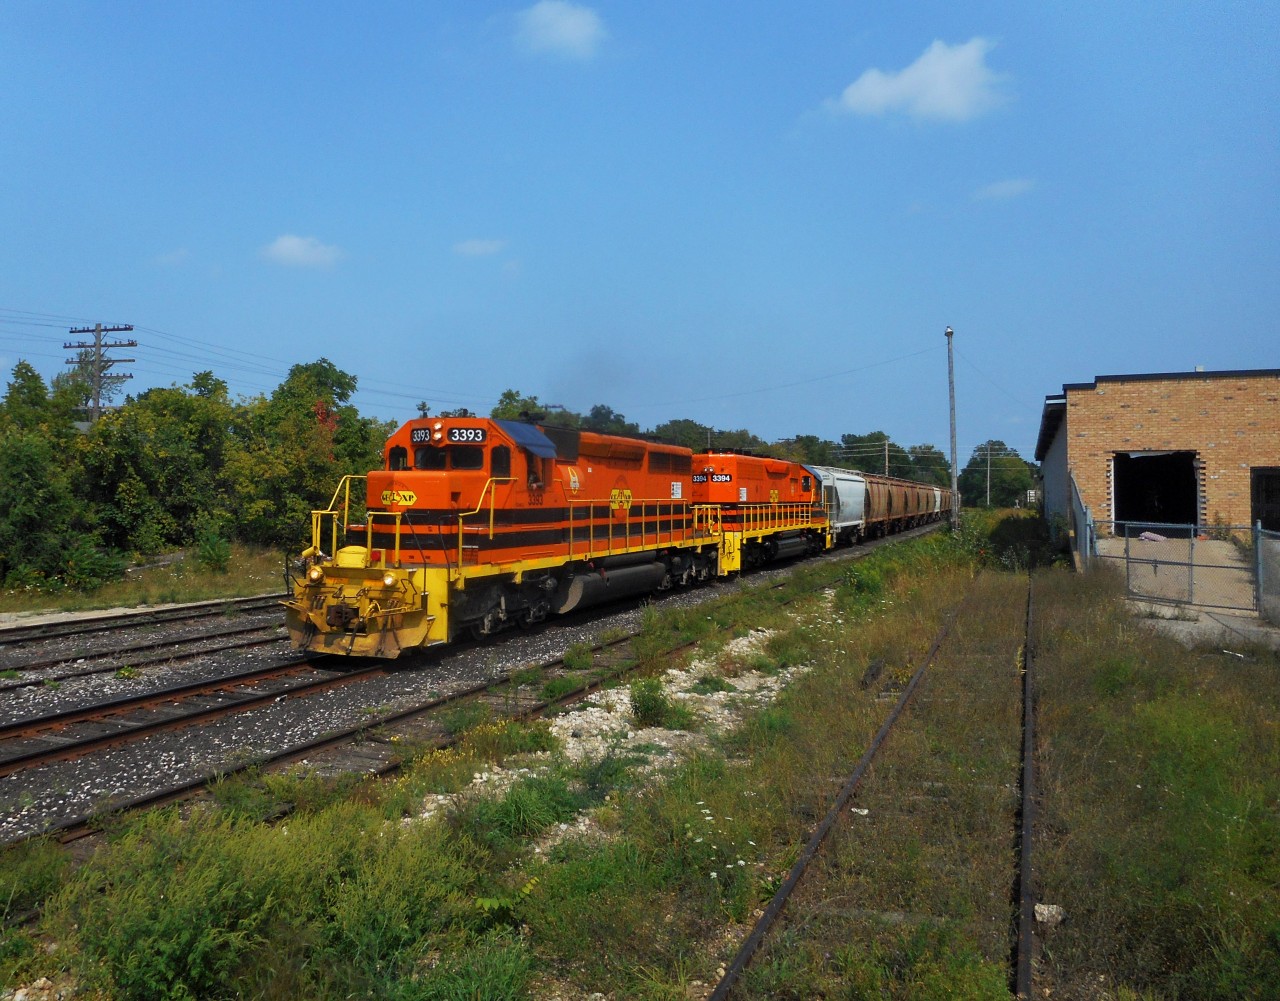 Hearing that 3394 was back from LDS in Sarnia  with orange paint, I headed out to catch it on it return from Toronto on it's first tour of duty.  Of course it was trailing.  Here, both of GEXR's SD40-2's 3393 and 3394 roll through Guelph with 54 cars.  The first 21 are salt cars for Goderich.  The rear 33 cars are auto racks, which will be set off at Kitchener for 516 to take to South Junction for the CPR.  And like many RP.ca photographers, I was out shooting 3394 the next morning.